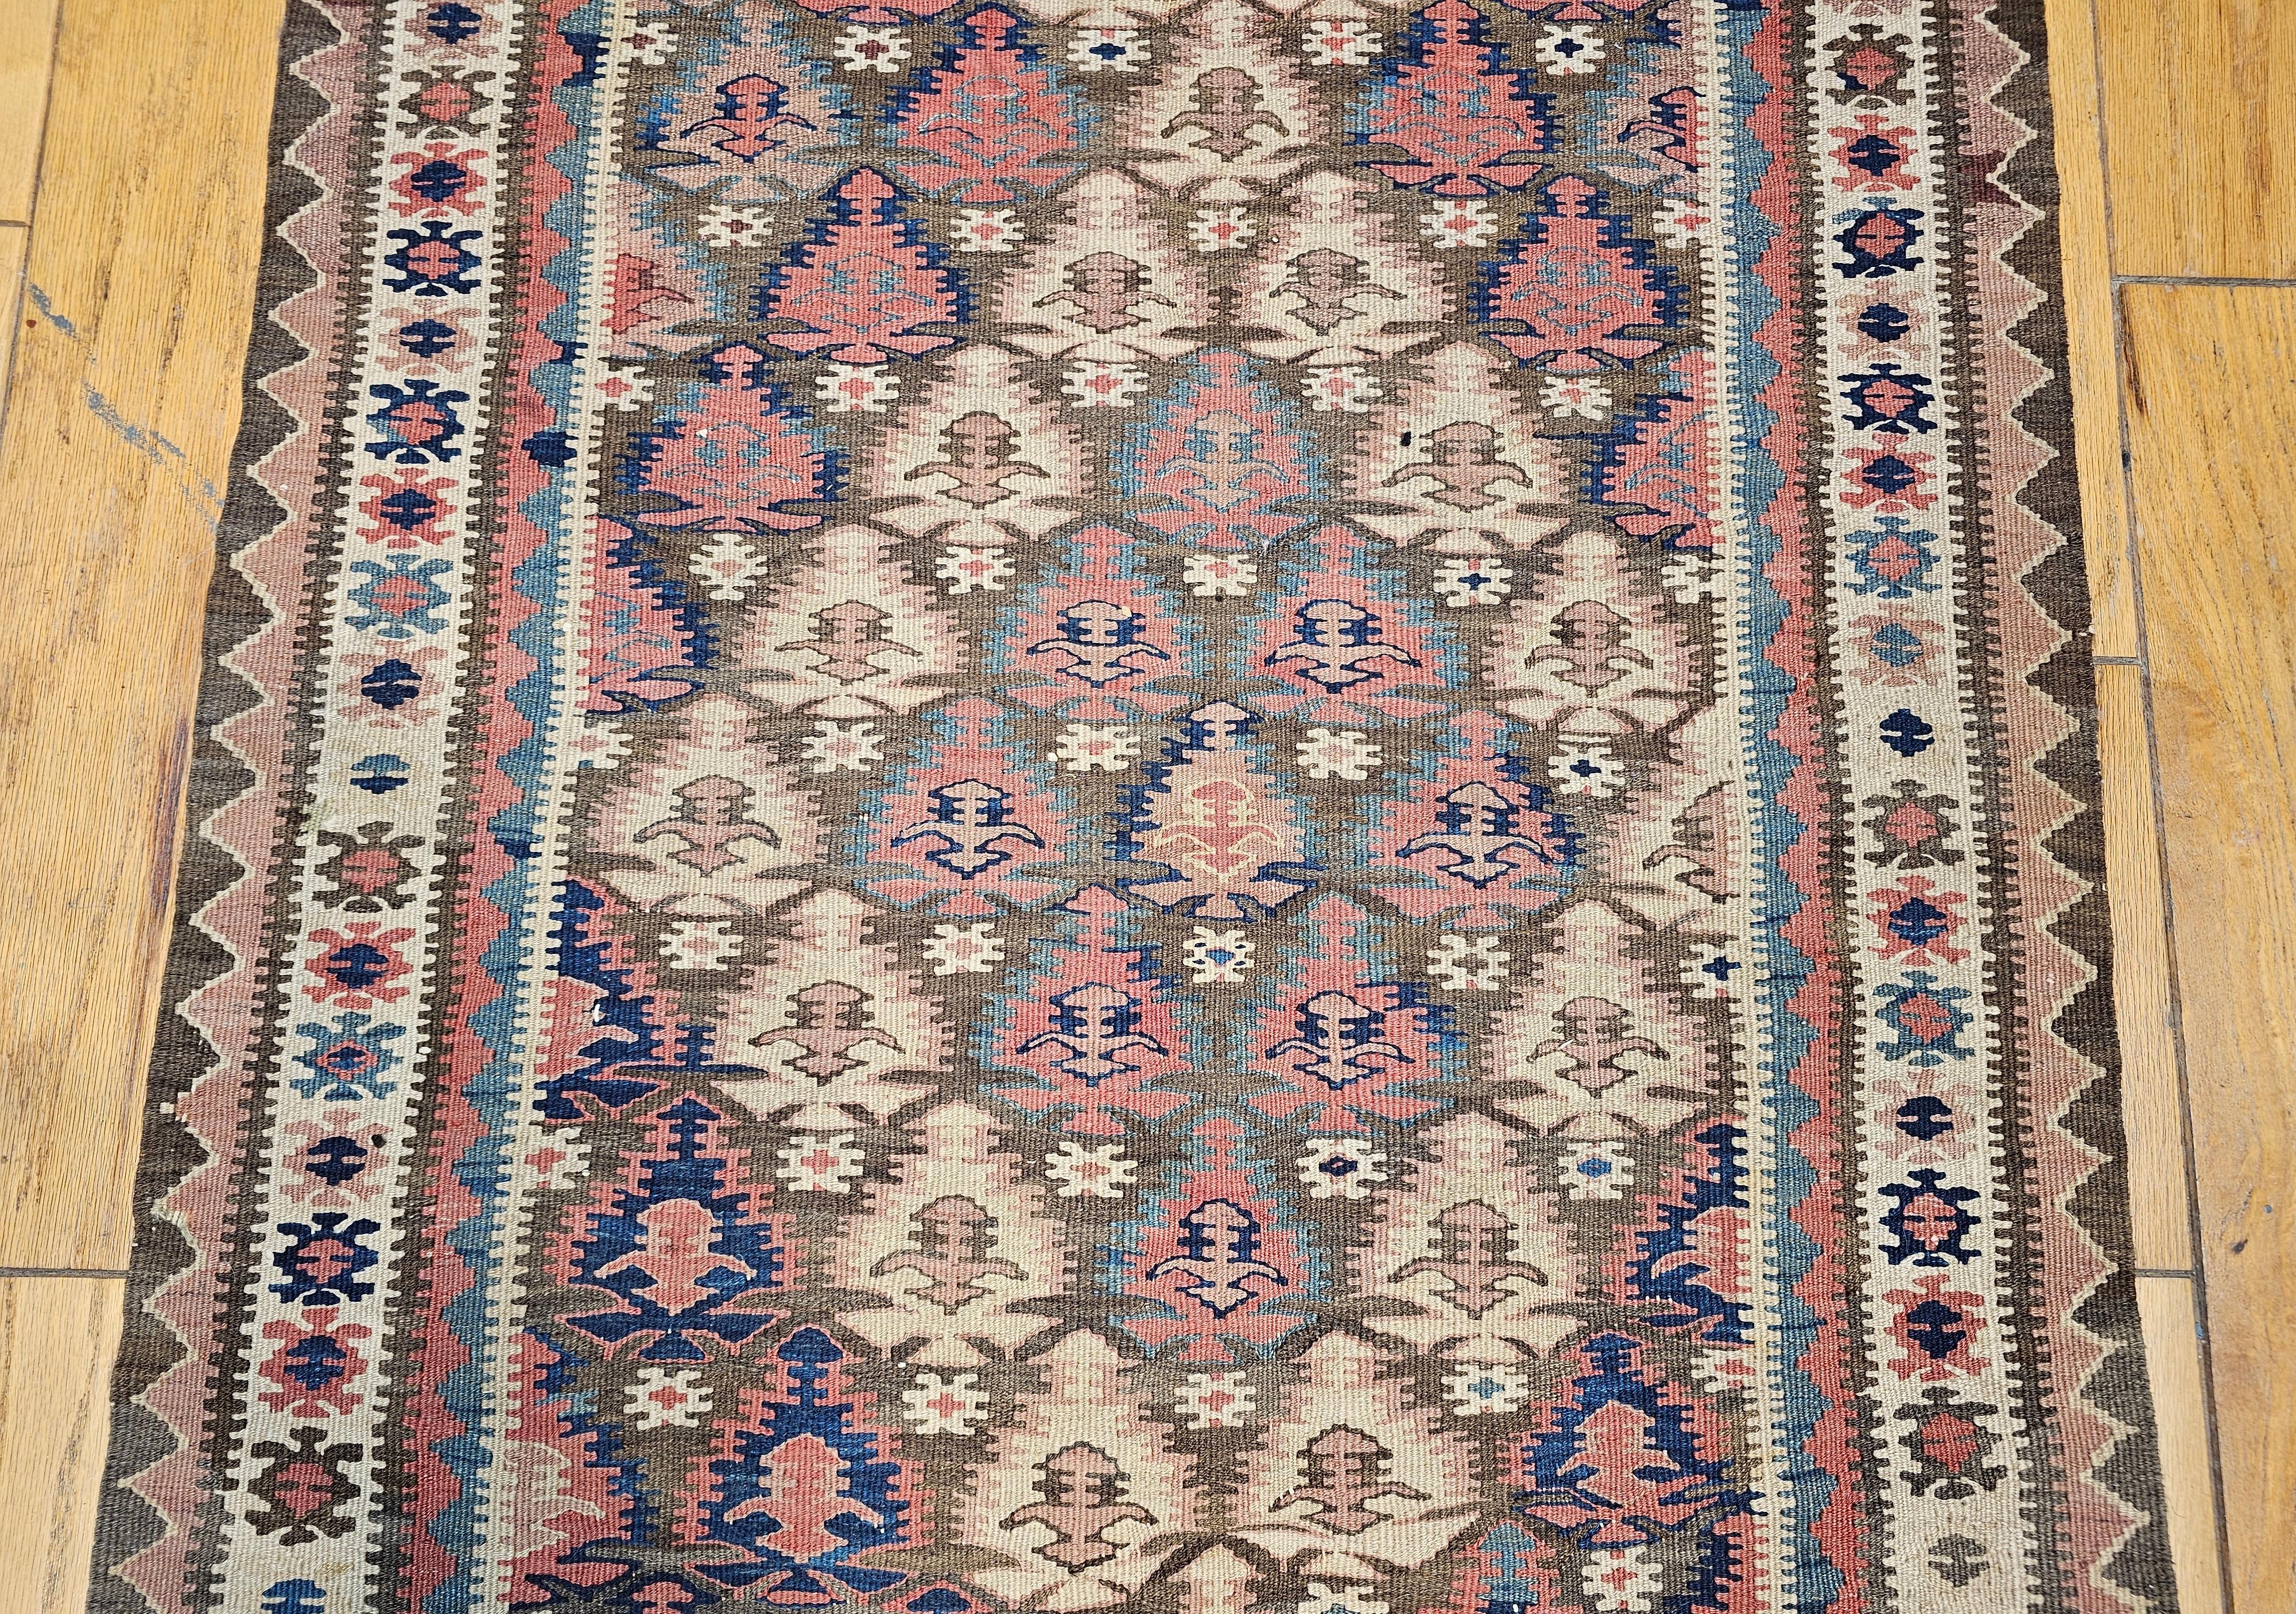 Vintage Persian Kilim Runner in Blue, Brown, Green, Yellow, Pink In Good Condition For Sale In Barrington, IL